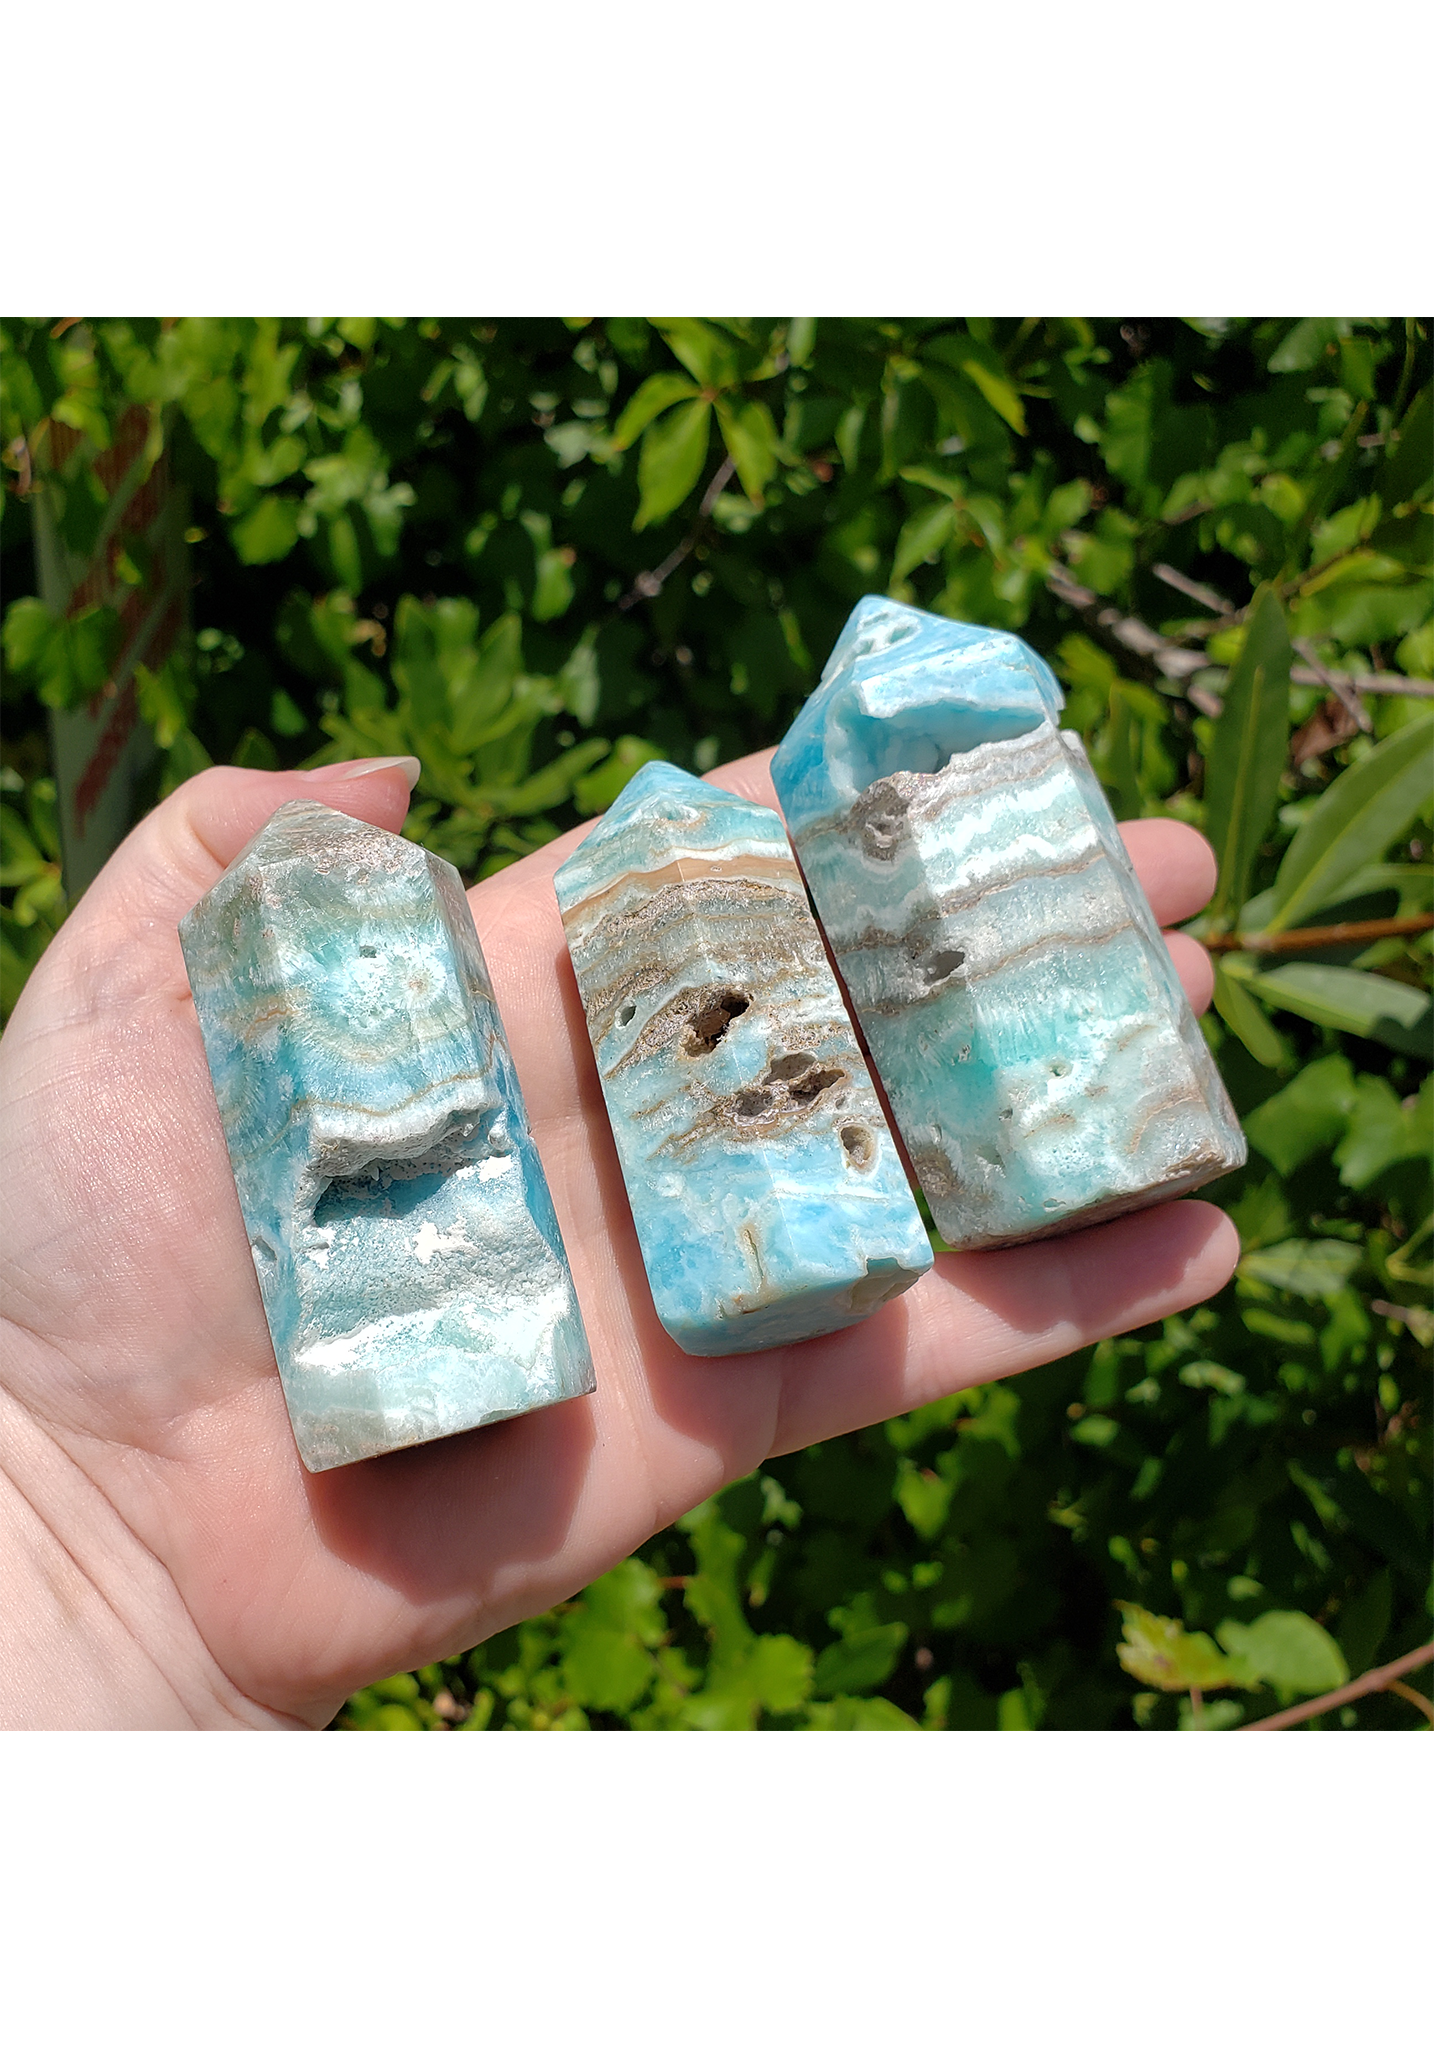 Blue Aragonite Gemstone Tower Point Obelisk - Natural Caverns and Texture - Small  1.75" - 2.8"